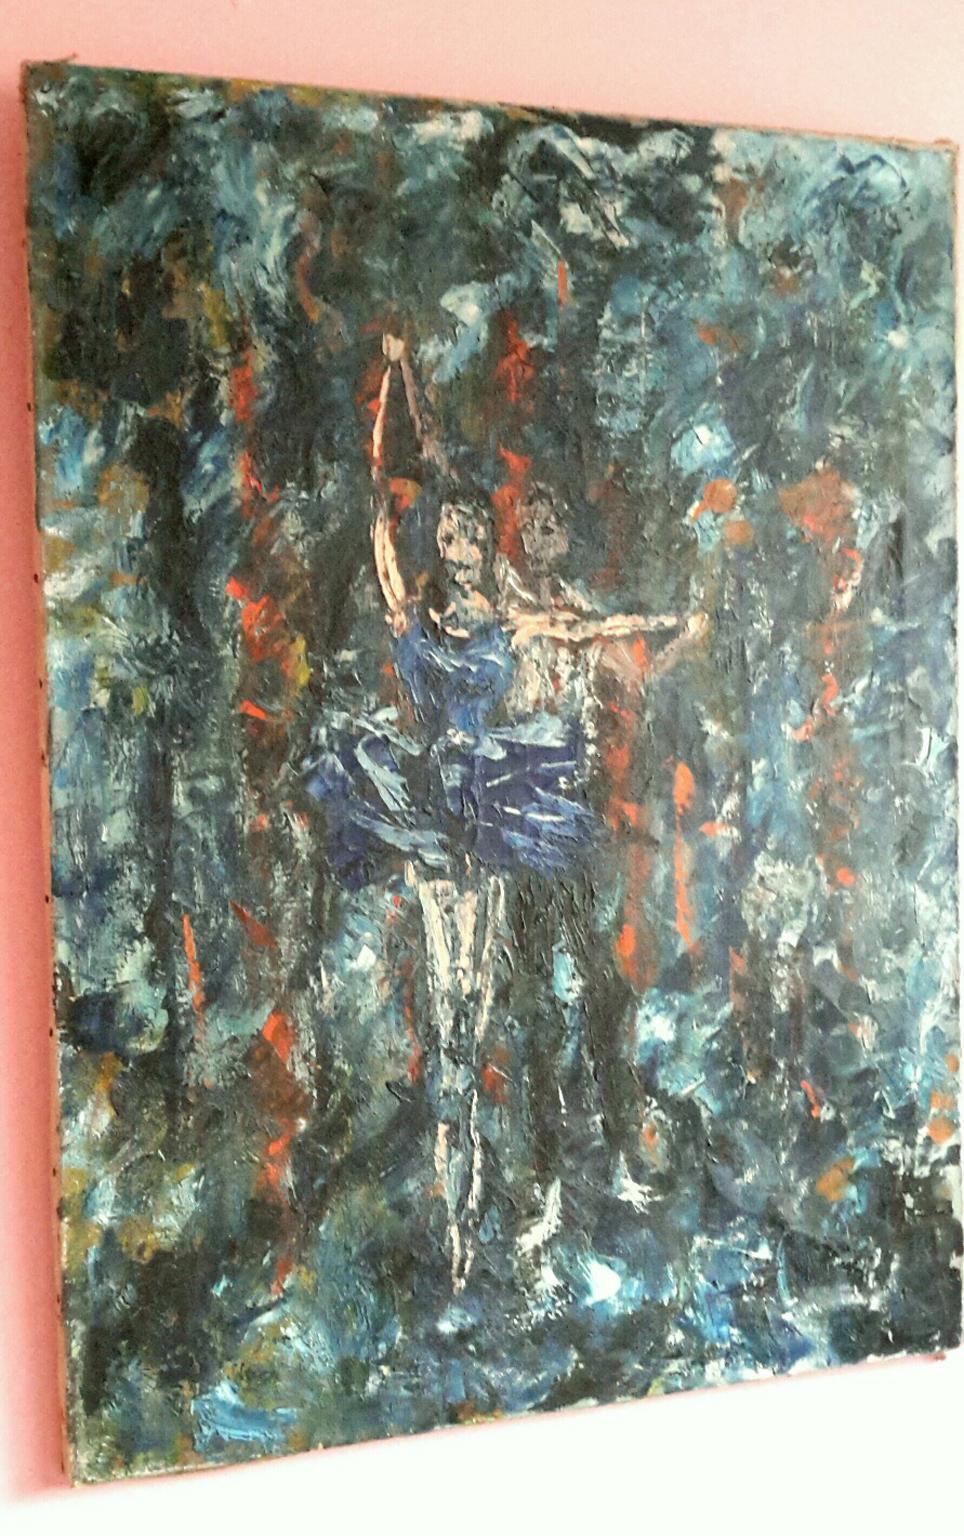 Large Belgium oil on canvas Expressionist style of the early 20th century depicting a symbolist scene of a couple of ballet dancers in a forest on fire.
The painting is signed on the back but illegible, dated 1932 and titled 